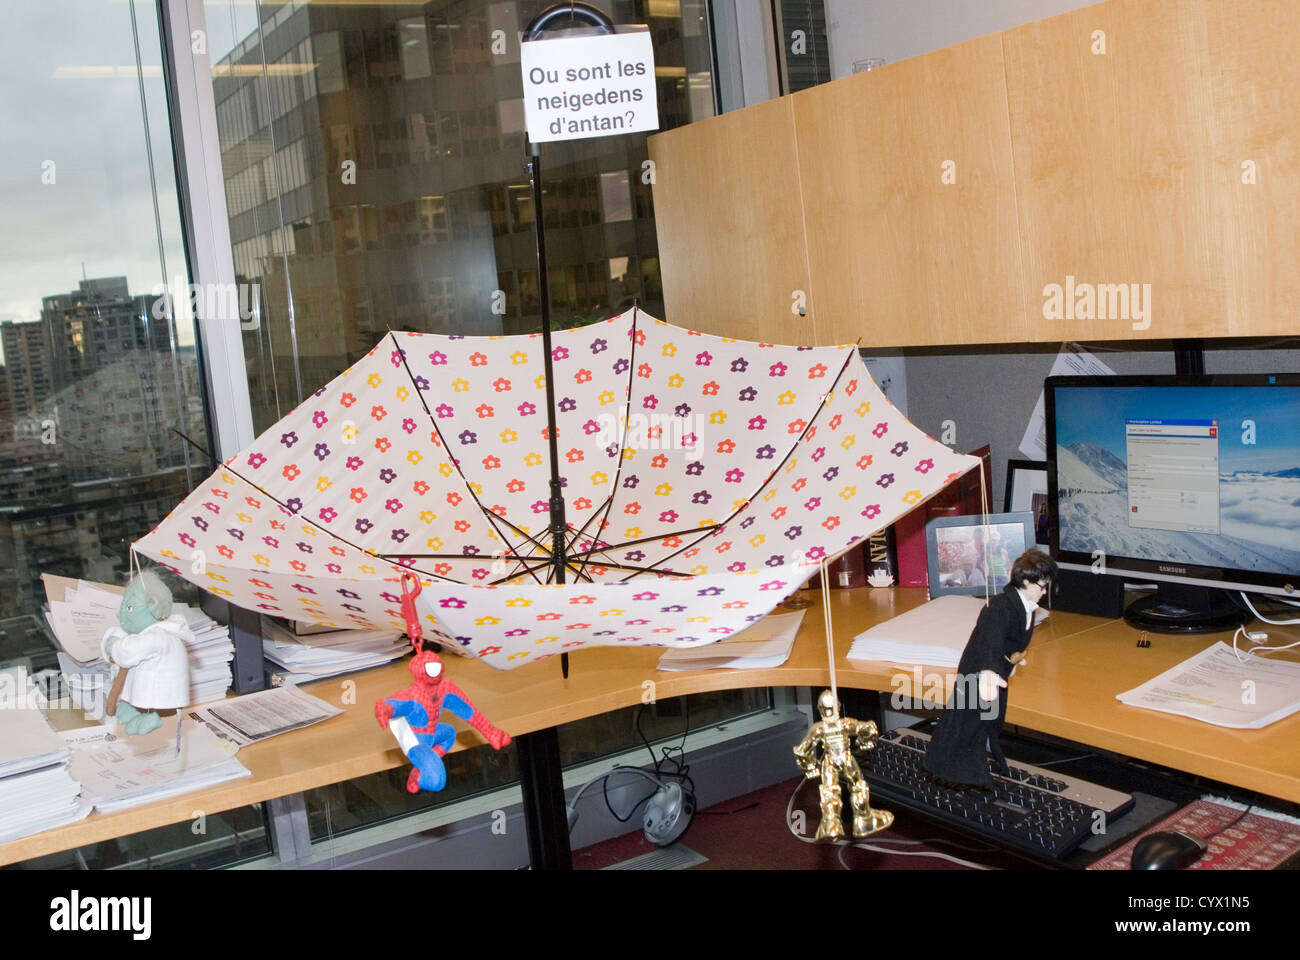 An Office Prank Upside Umbrella On A Desk Toys Spread Out On